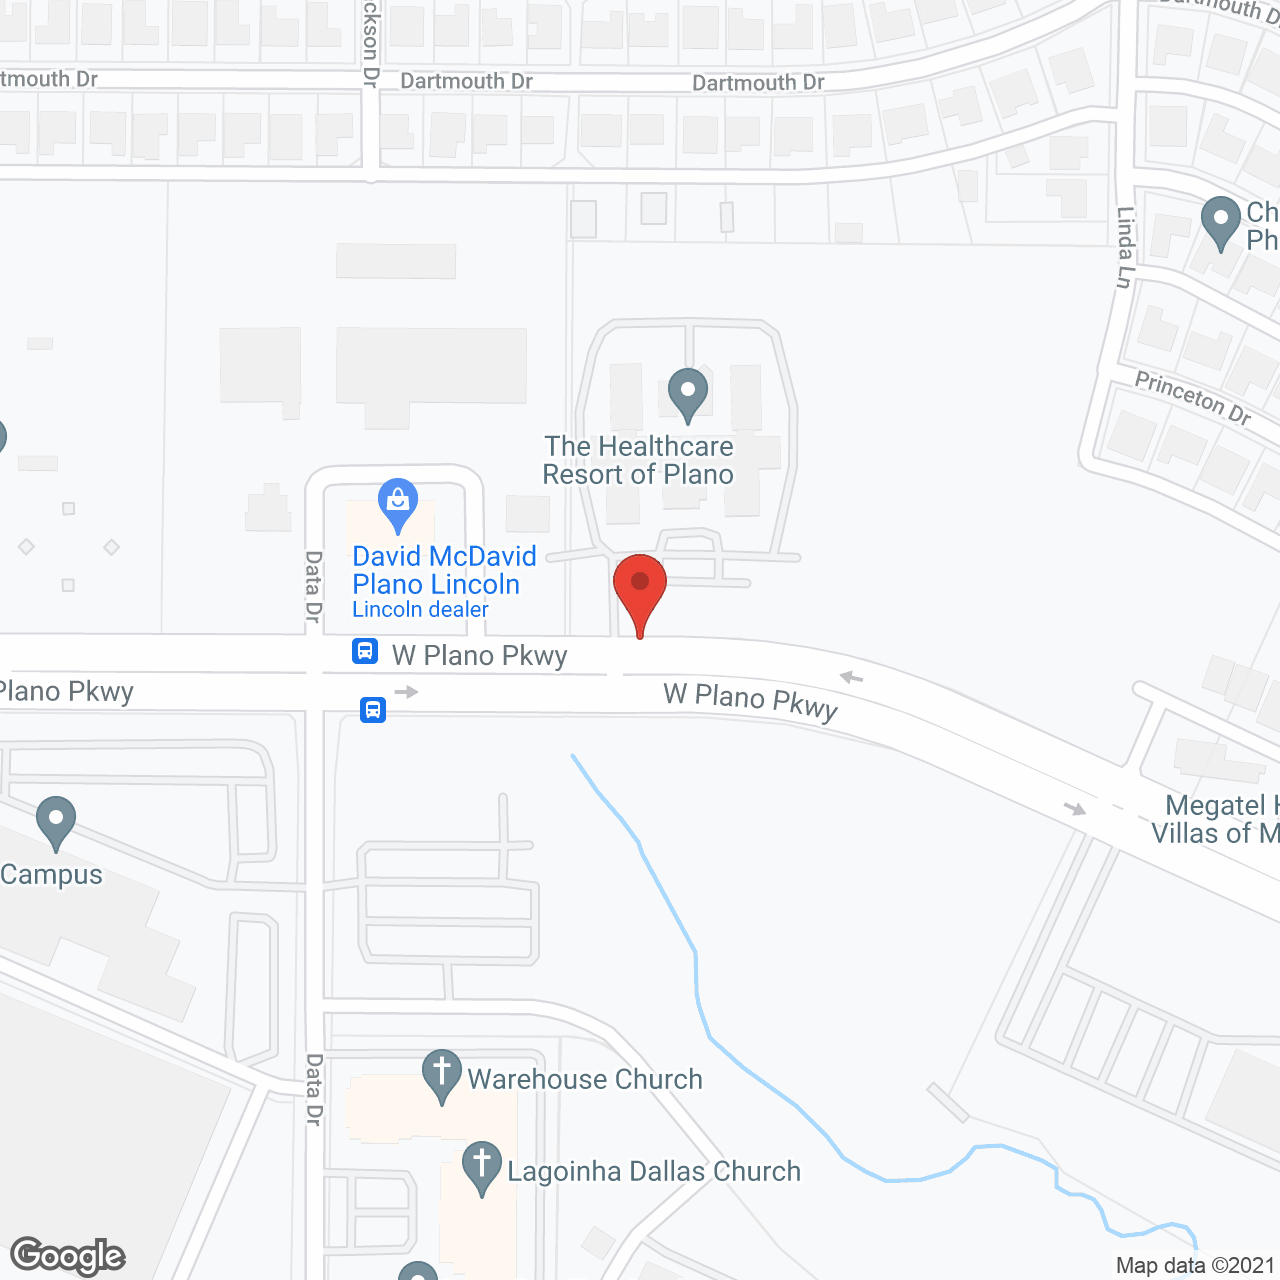 The Healthcare Resort of Plano in google map